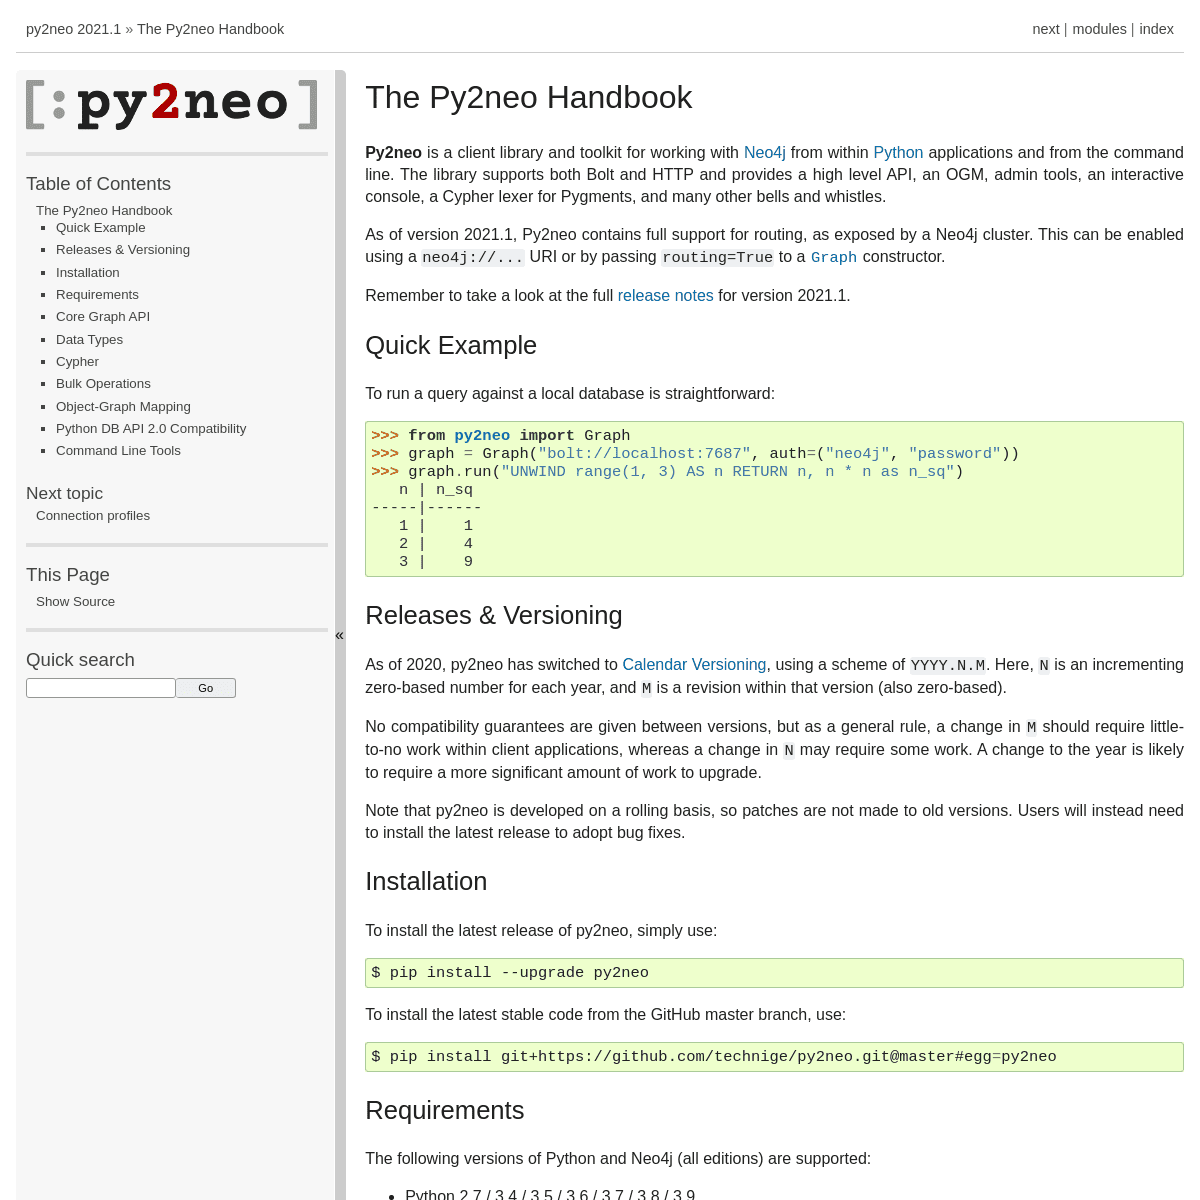 A complete backup of https://py2neo.org